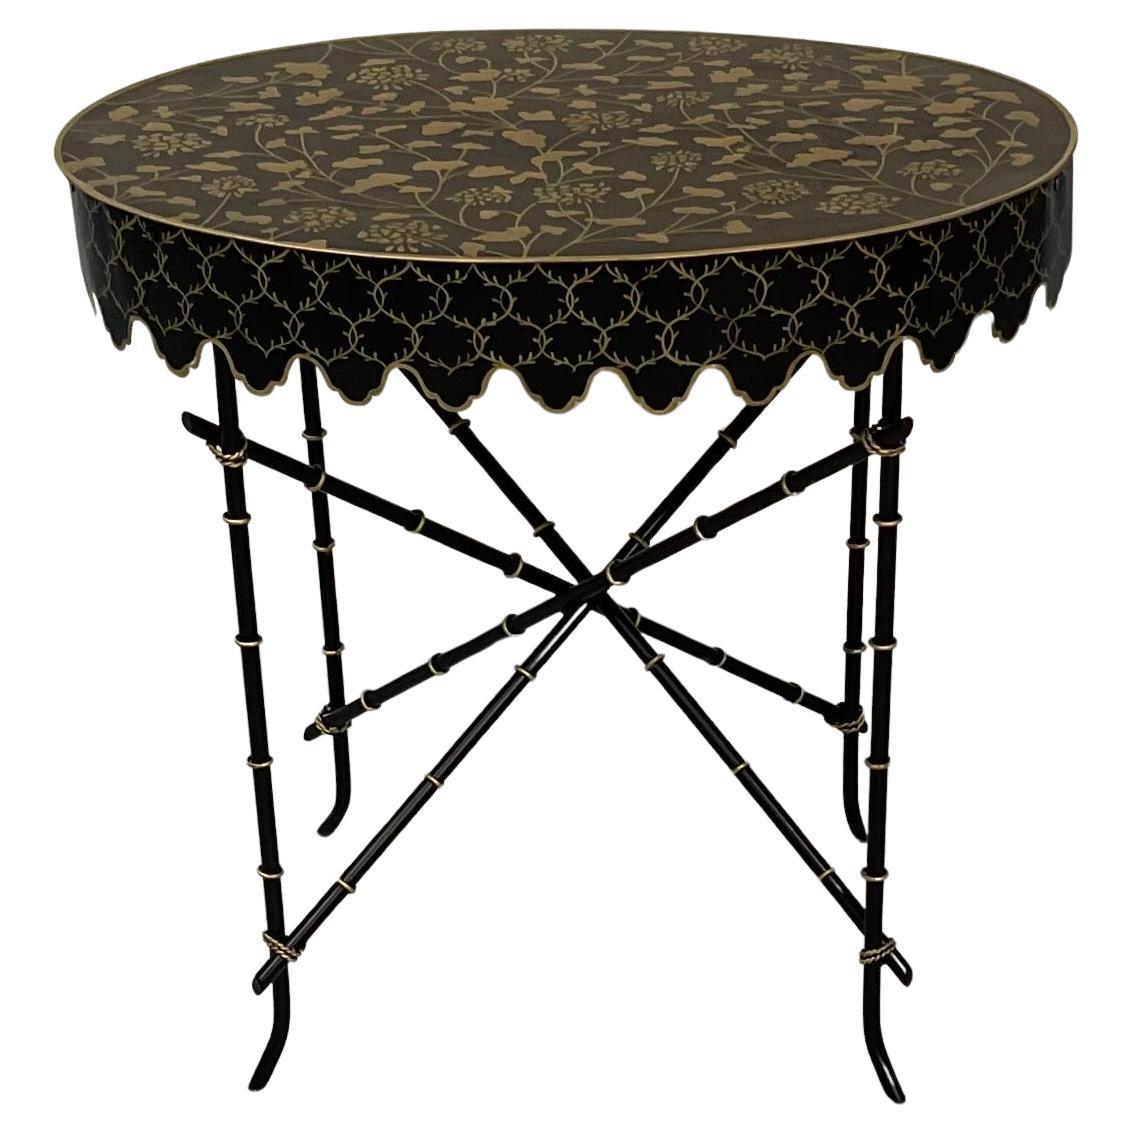 Wunderschöne Bambus Oval Handpainted Tole Scalloped Seite Ende Kaffee Cocktail Tables